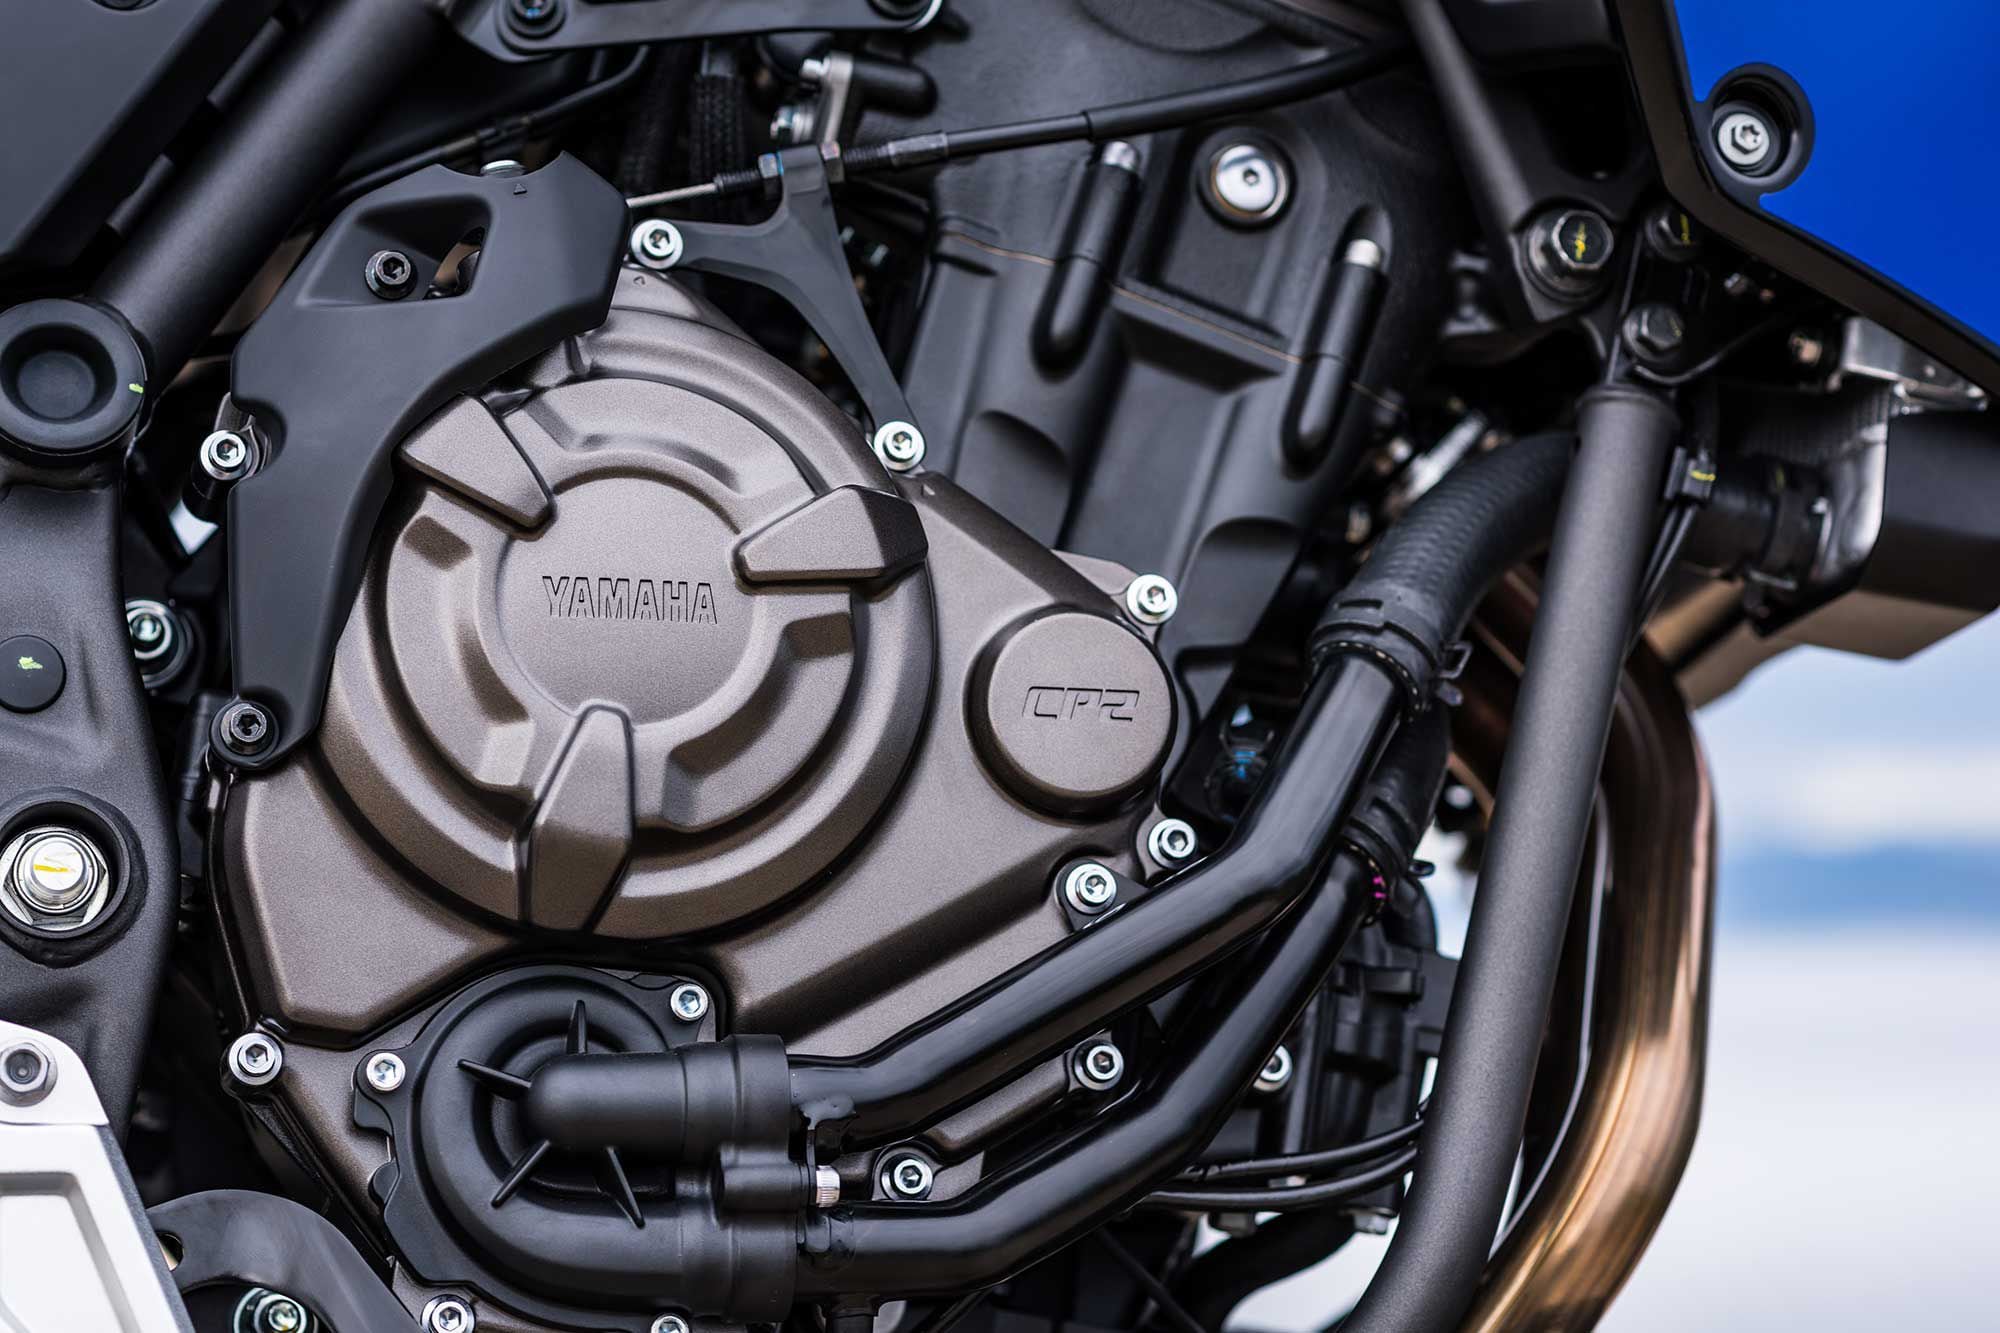 Yamaha employs its 689cc CP2 parallel twin in four models in 2022.